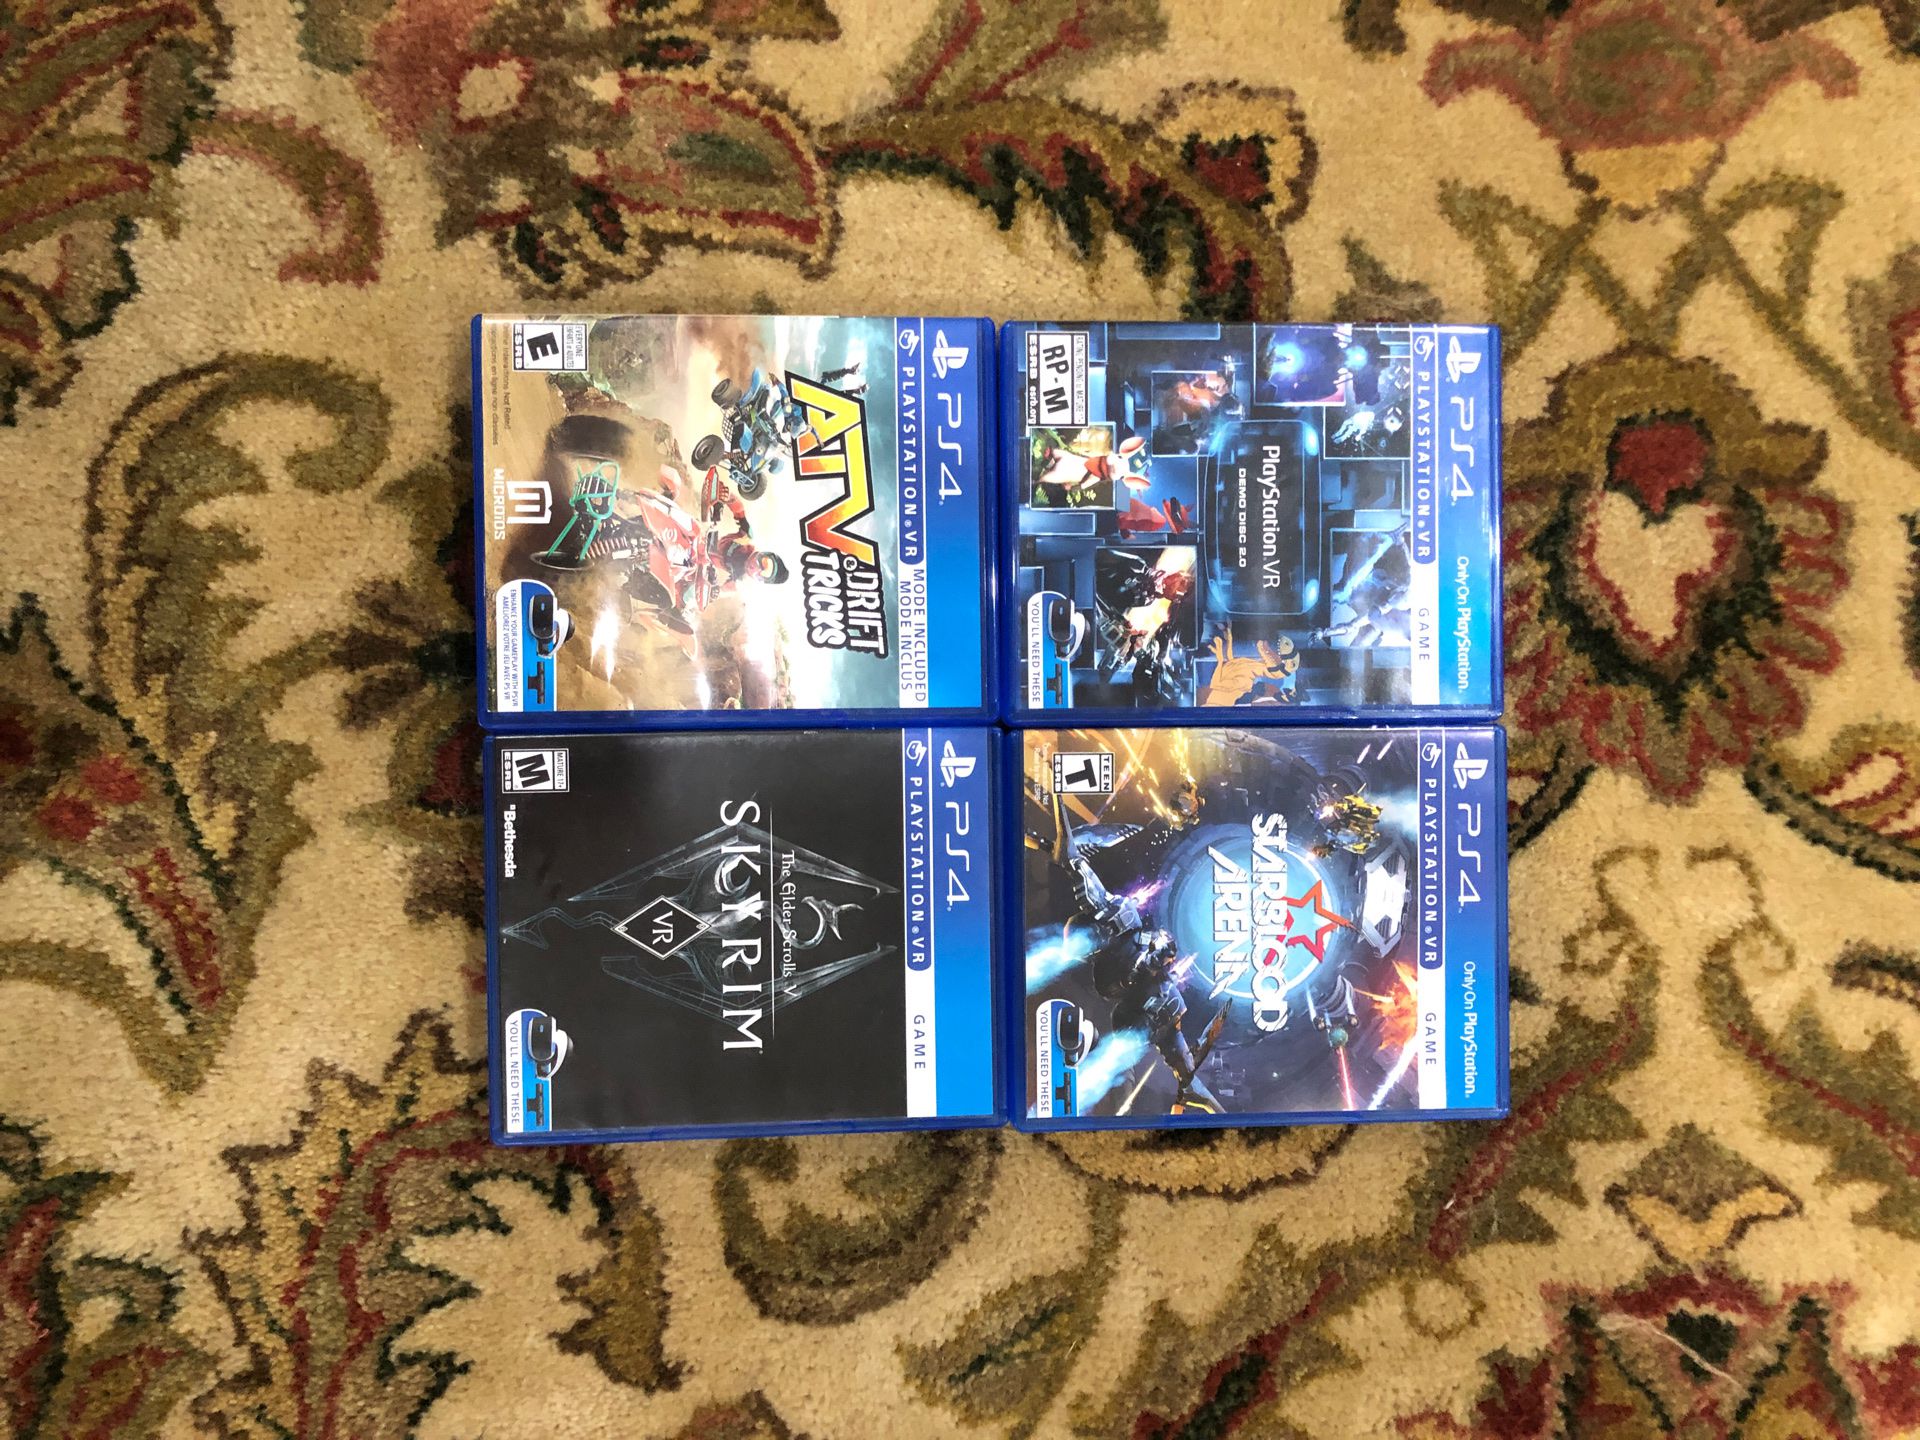 Play station VR games for 8$ each trades acceptable